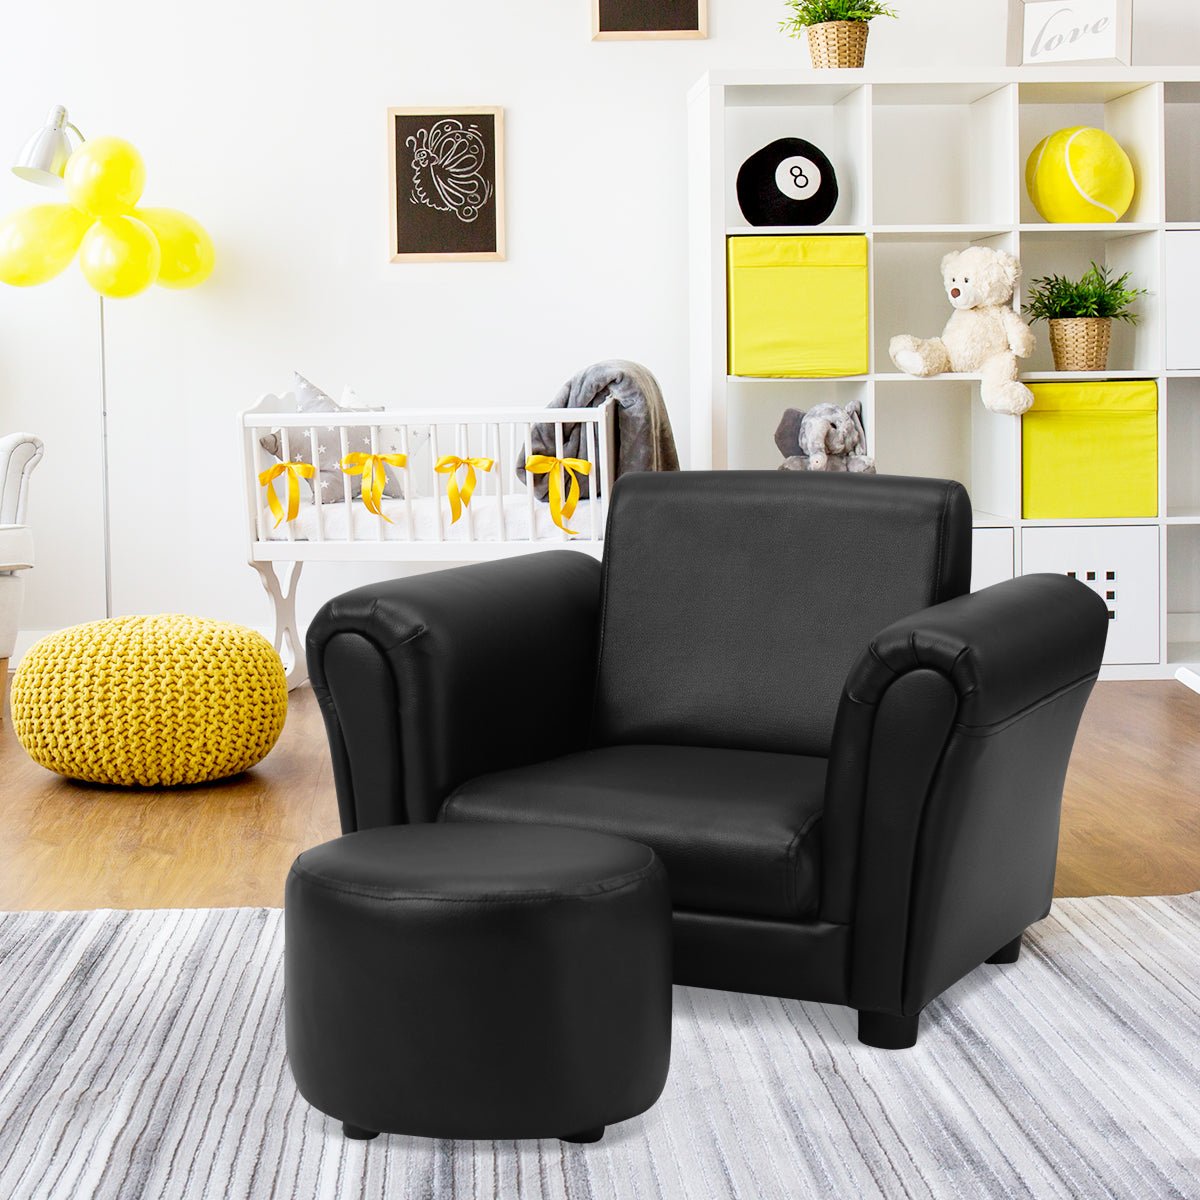 Ergonomic Seating for Babies and Children - Black Sofa with Footstool